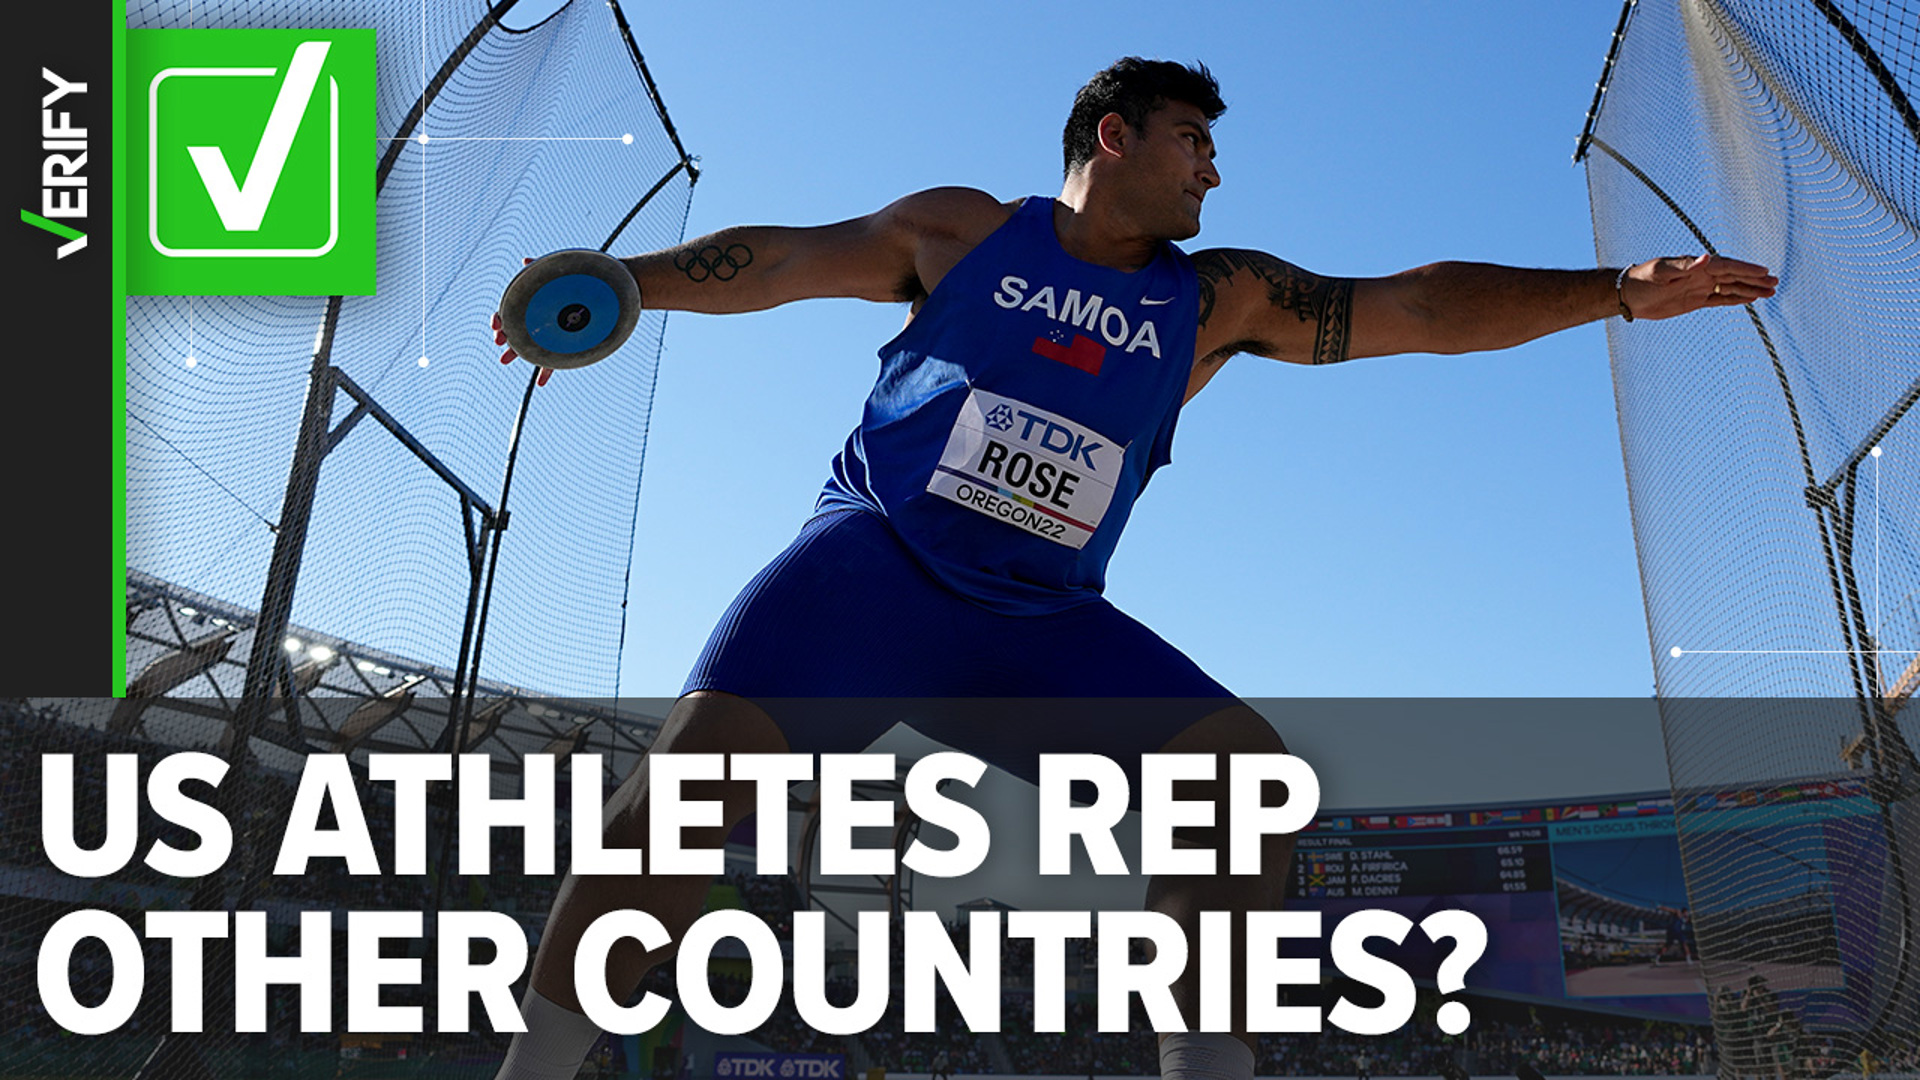 Athletes with dual-citizenship can choose which country to represent, but they cannot switch countries within three years of the Olympic Games.